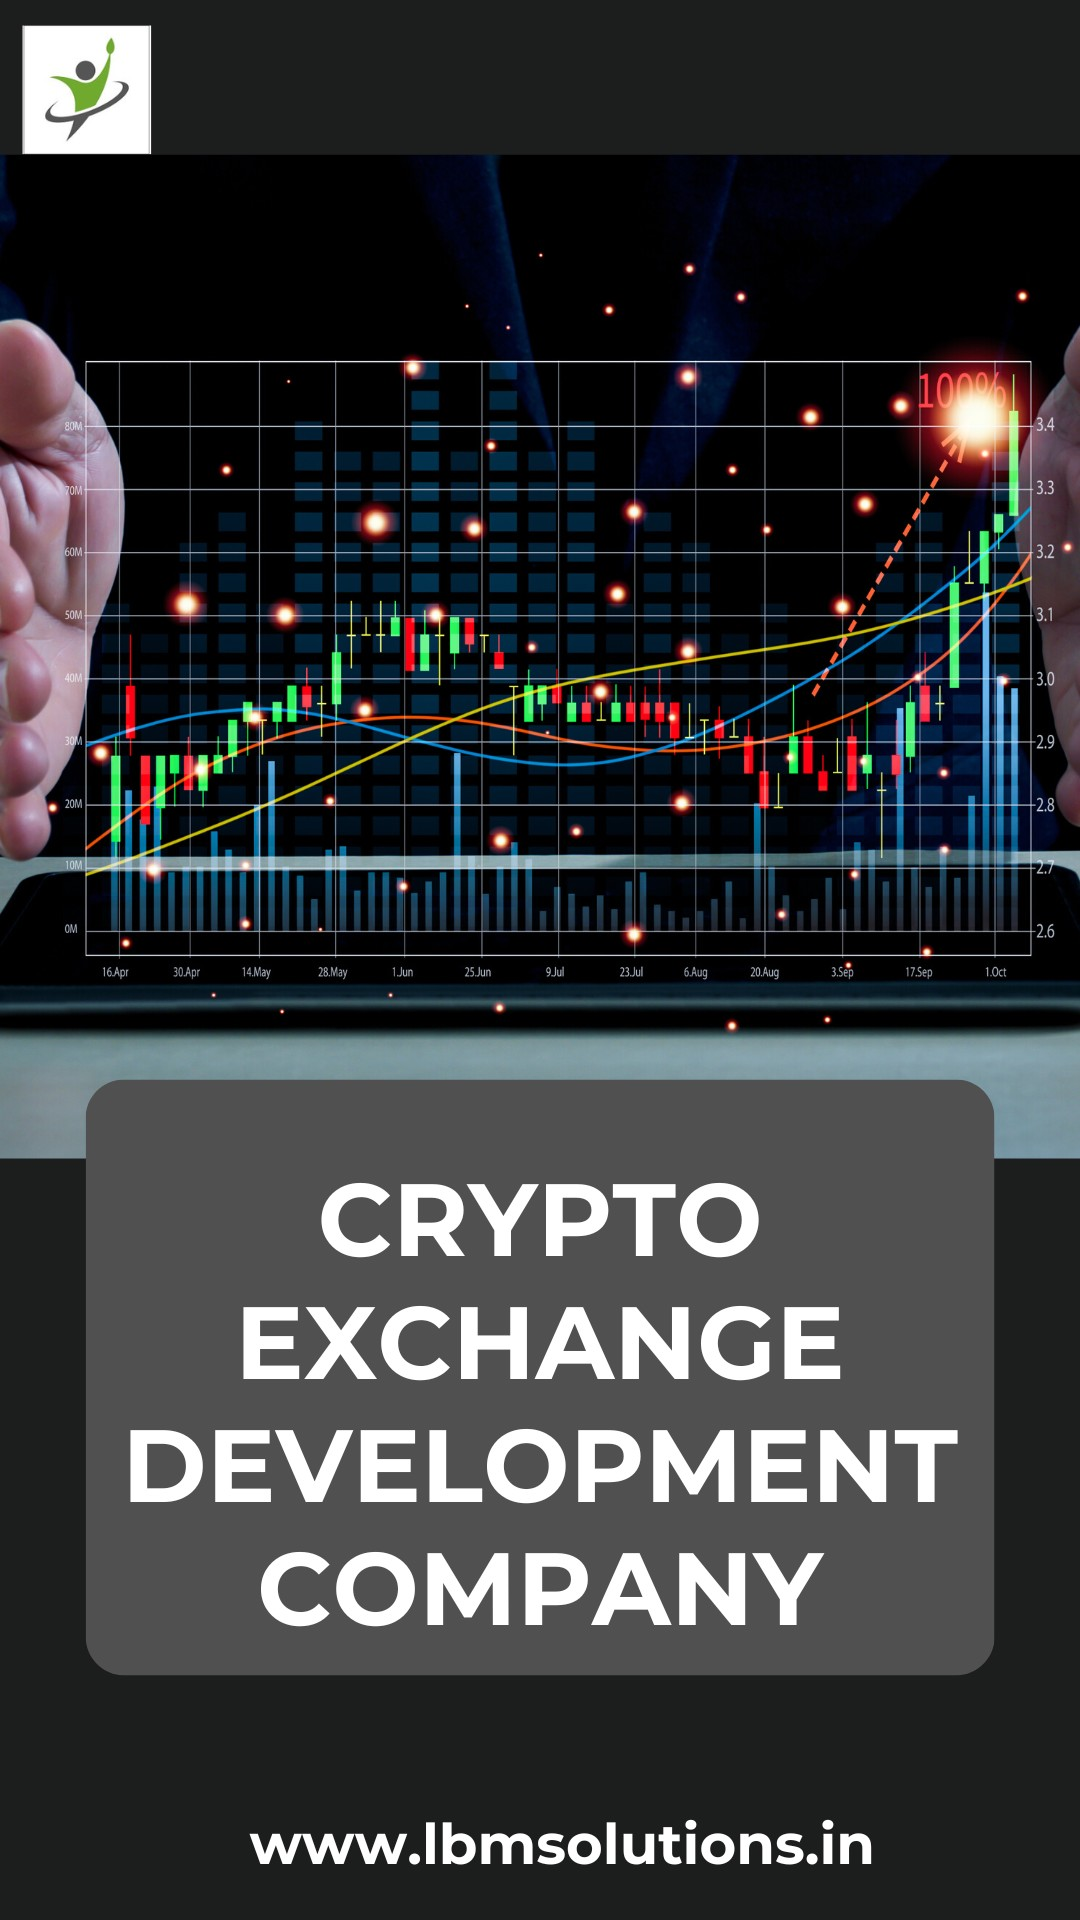  Everything You Wanted to Know About CRYPTO EXCHANGE DEVELOPMENT COMPANY